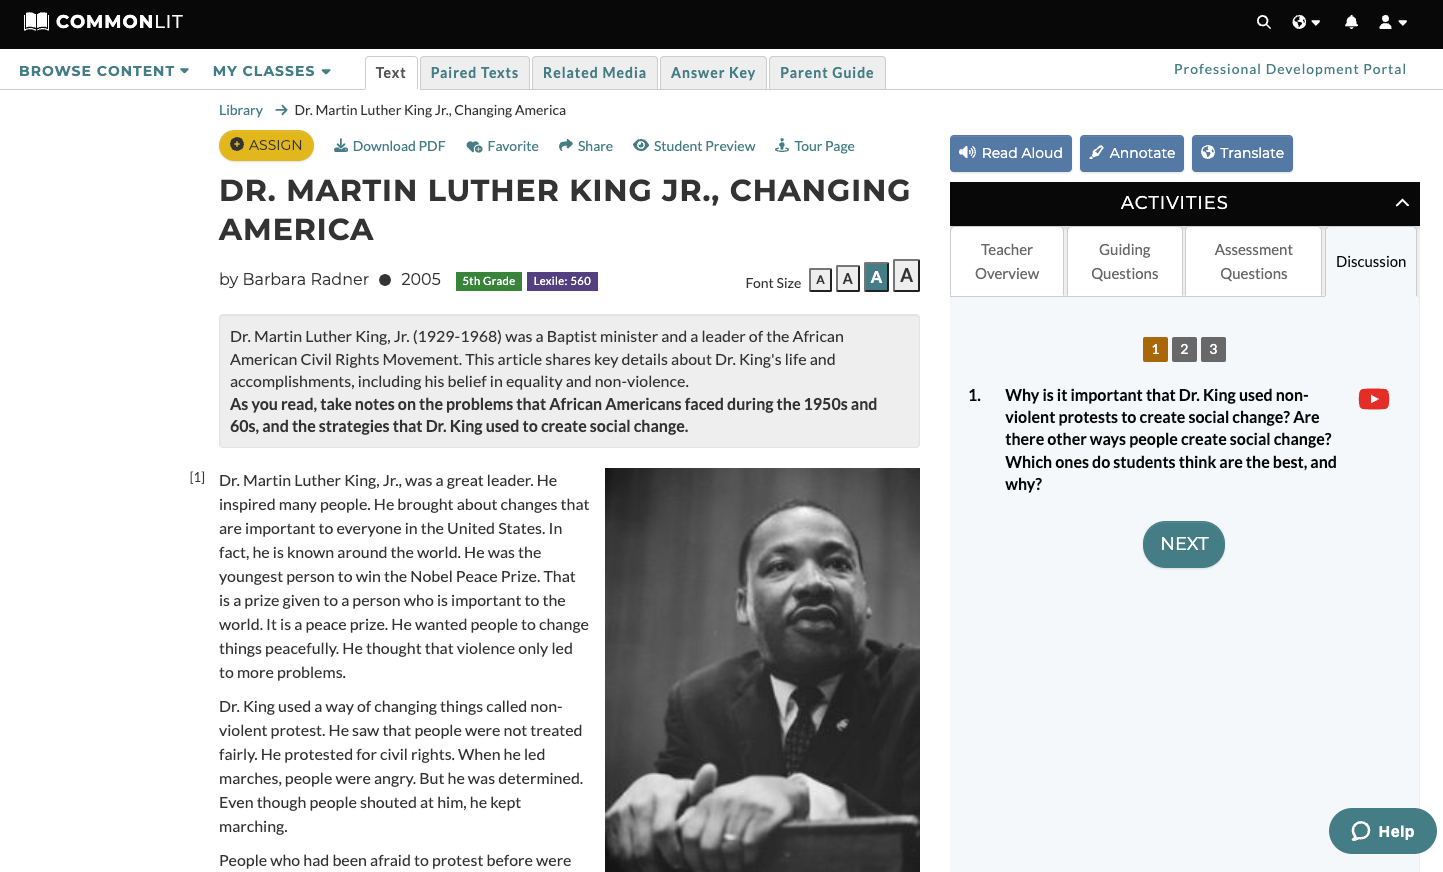 A screen shot of the discussion question for "Dr. Martin Luther King Jr., Changing America."